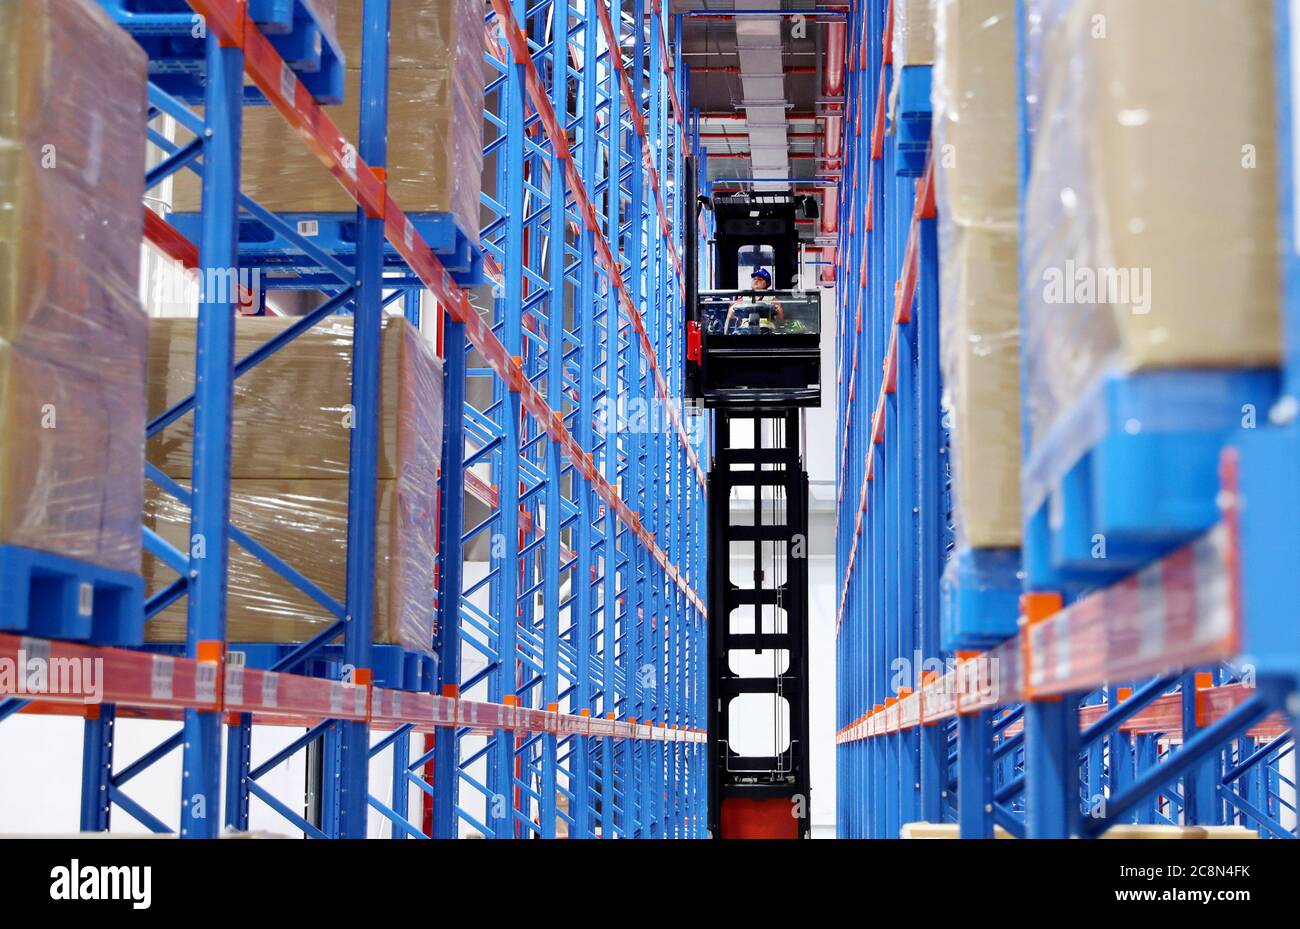 Shanghai, China. 5th June, 2020. A staff member works between storage shelves at Hongqiao Central Business District Bonded Logistics Centre in Shanghai, east China, June 5, 2020. TO GO WITH XINHUA HEADLINES OF JULY 26, 2020 Credit: Fang Zhe/Xinhua/Alamy Live News Stock Photo